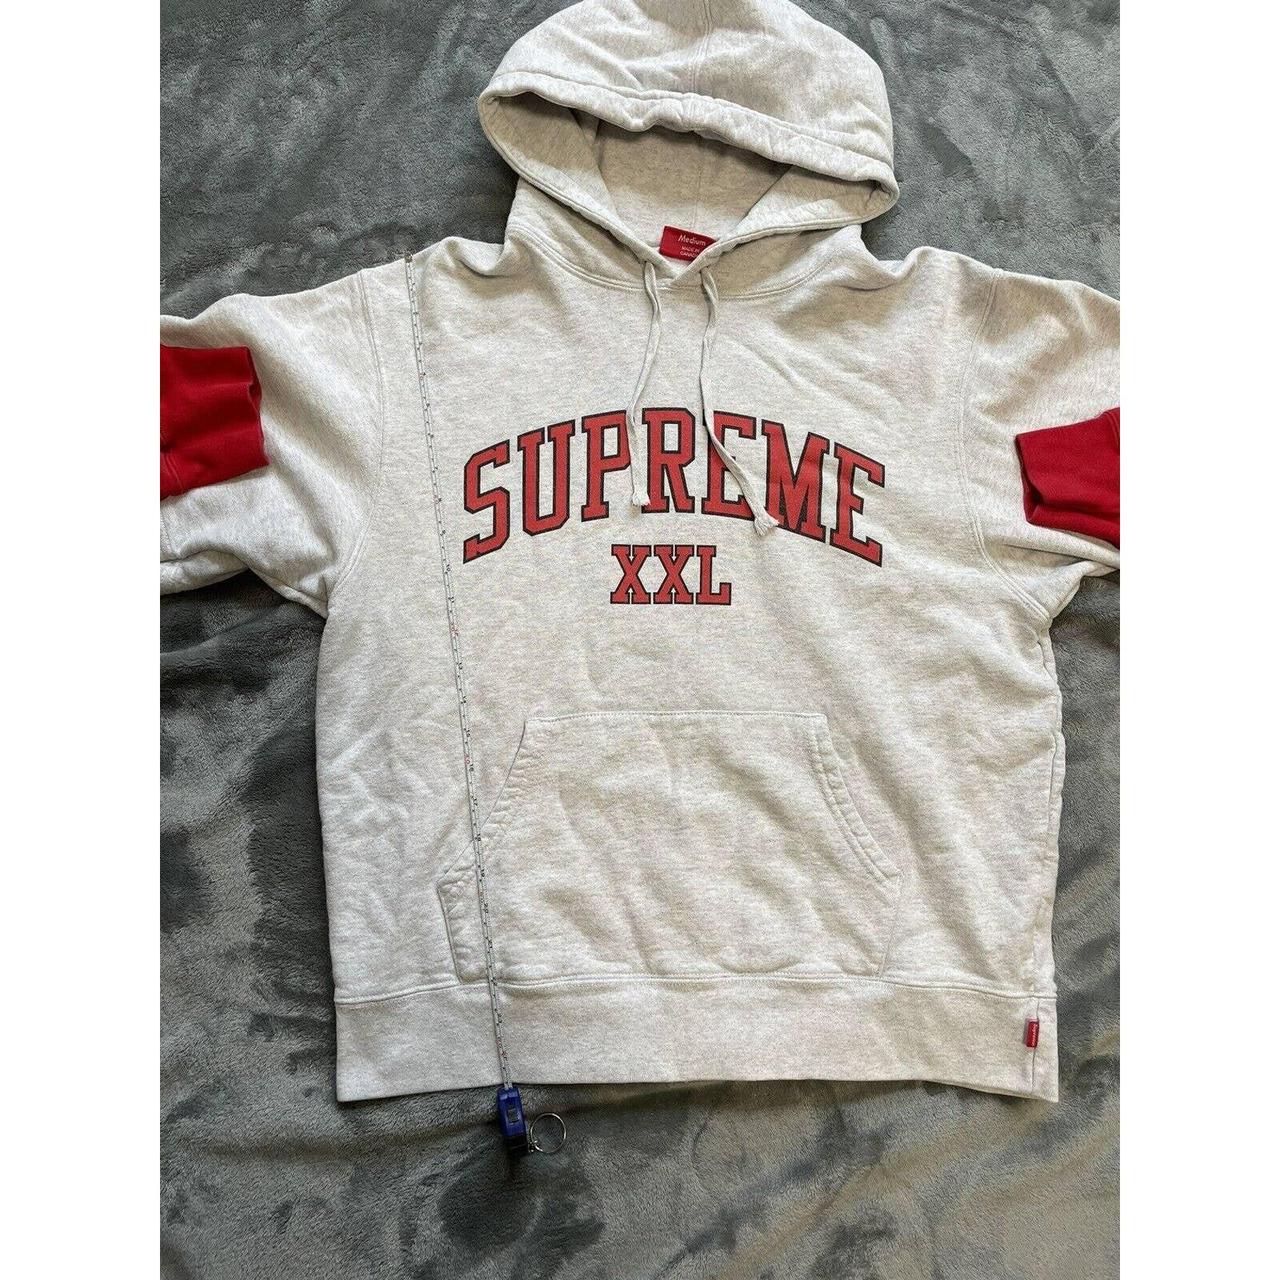 Supreme XXL Hoodie Sweatshirt Gray/ Red Spell Out...